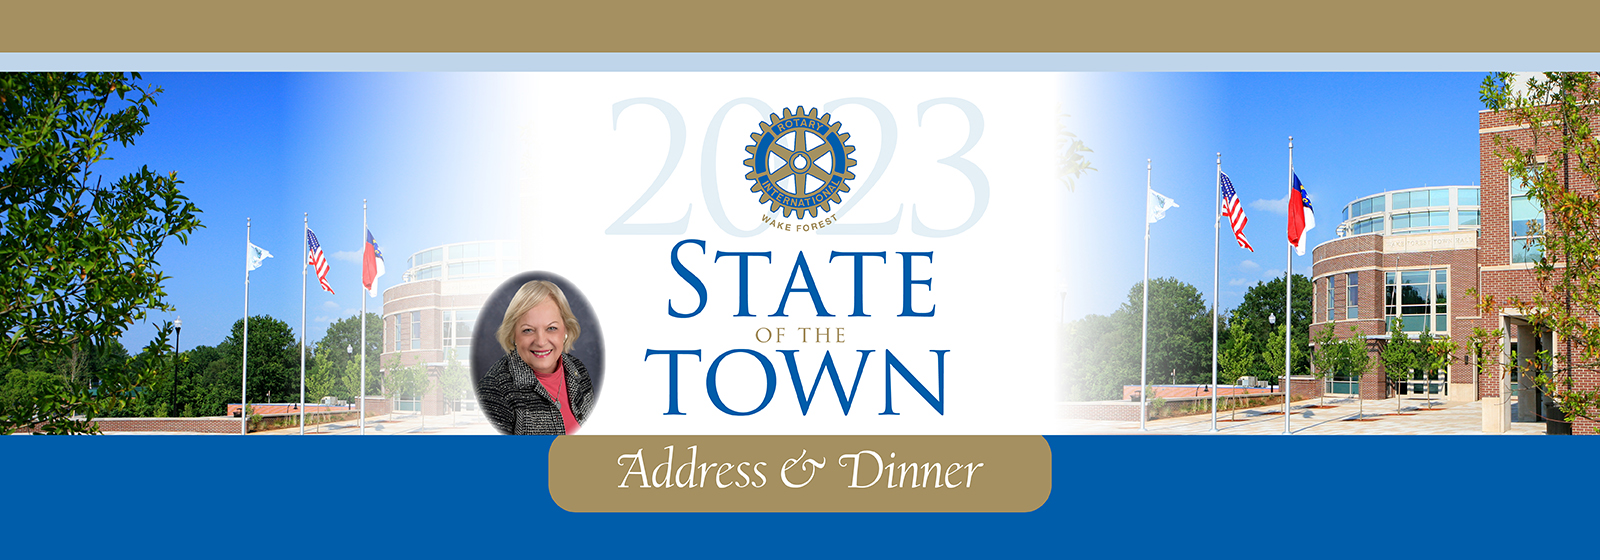 2023 State of the Town Address & Dinner